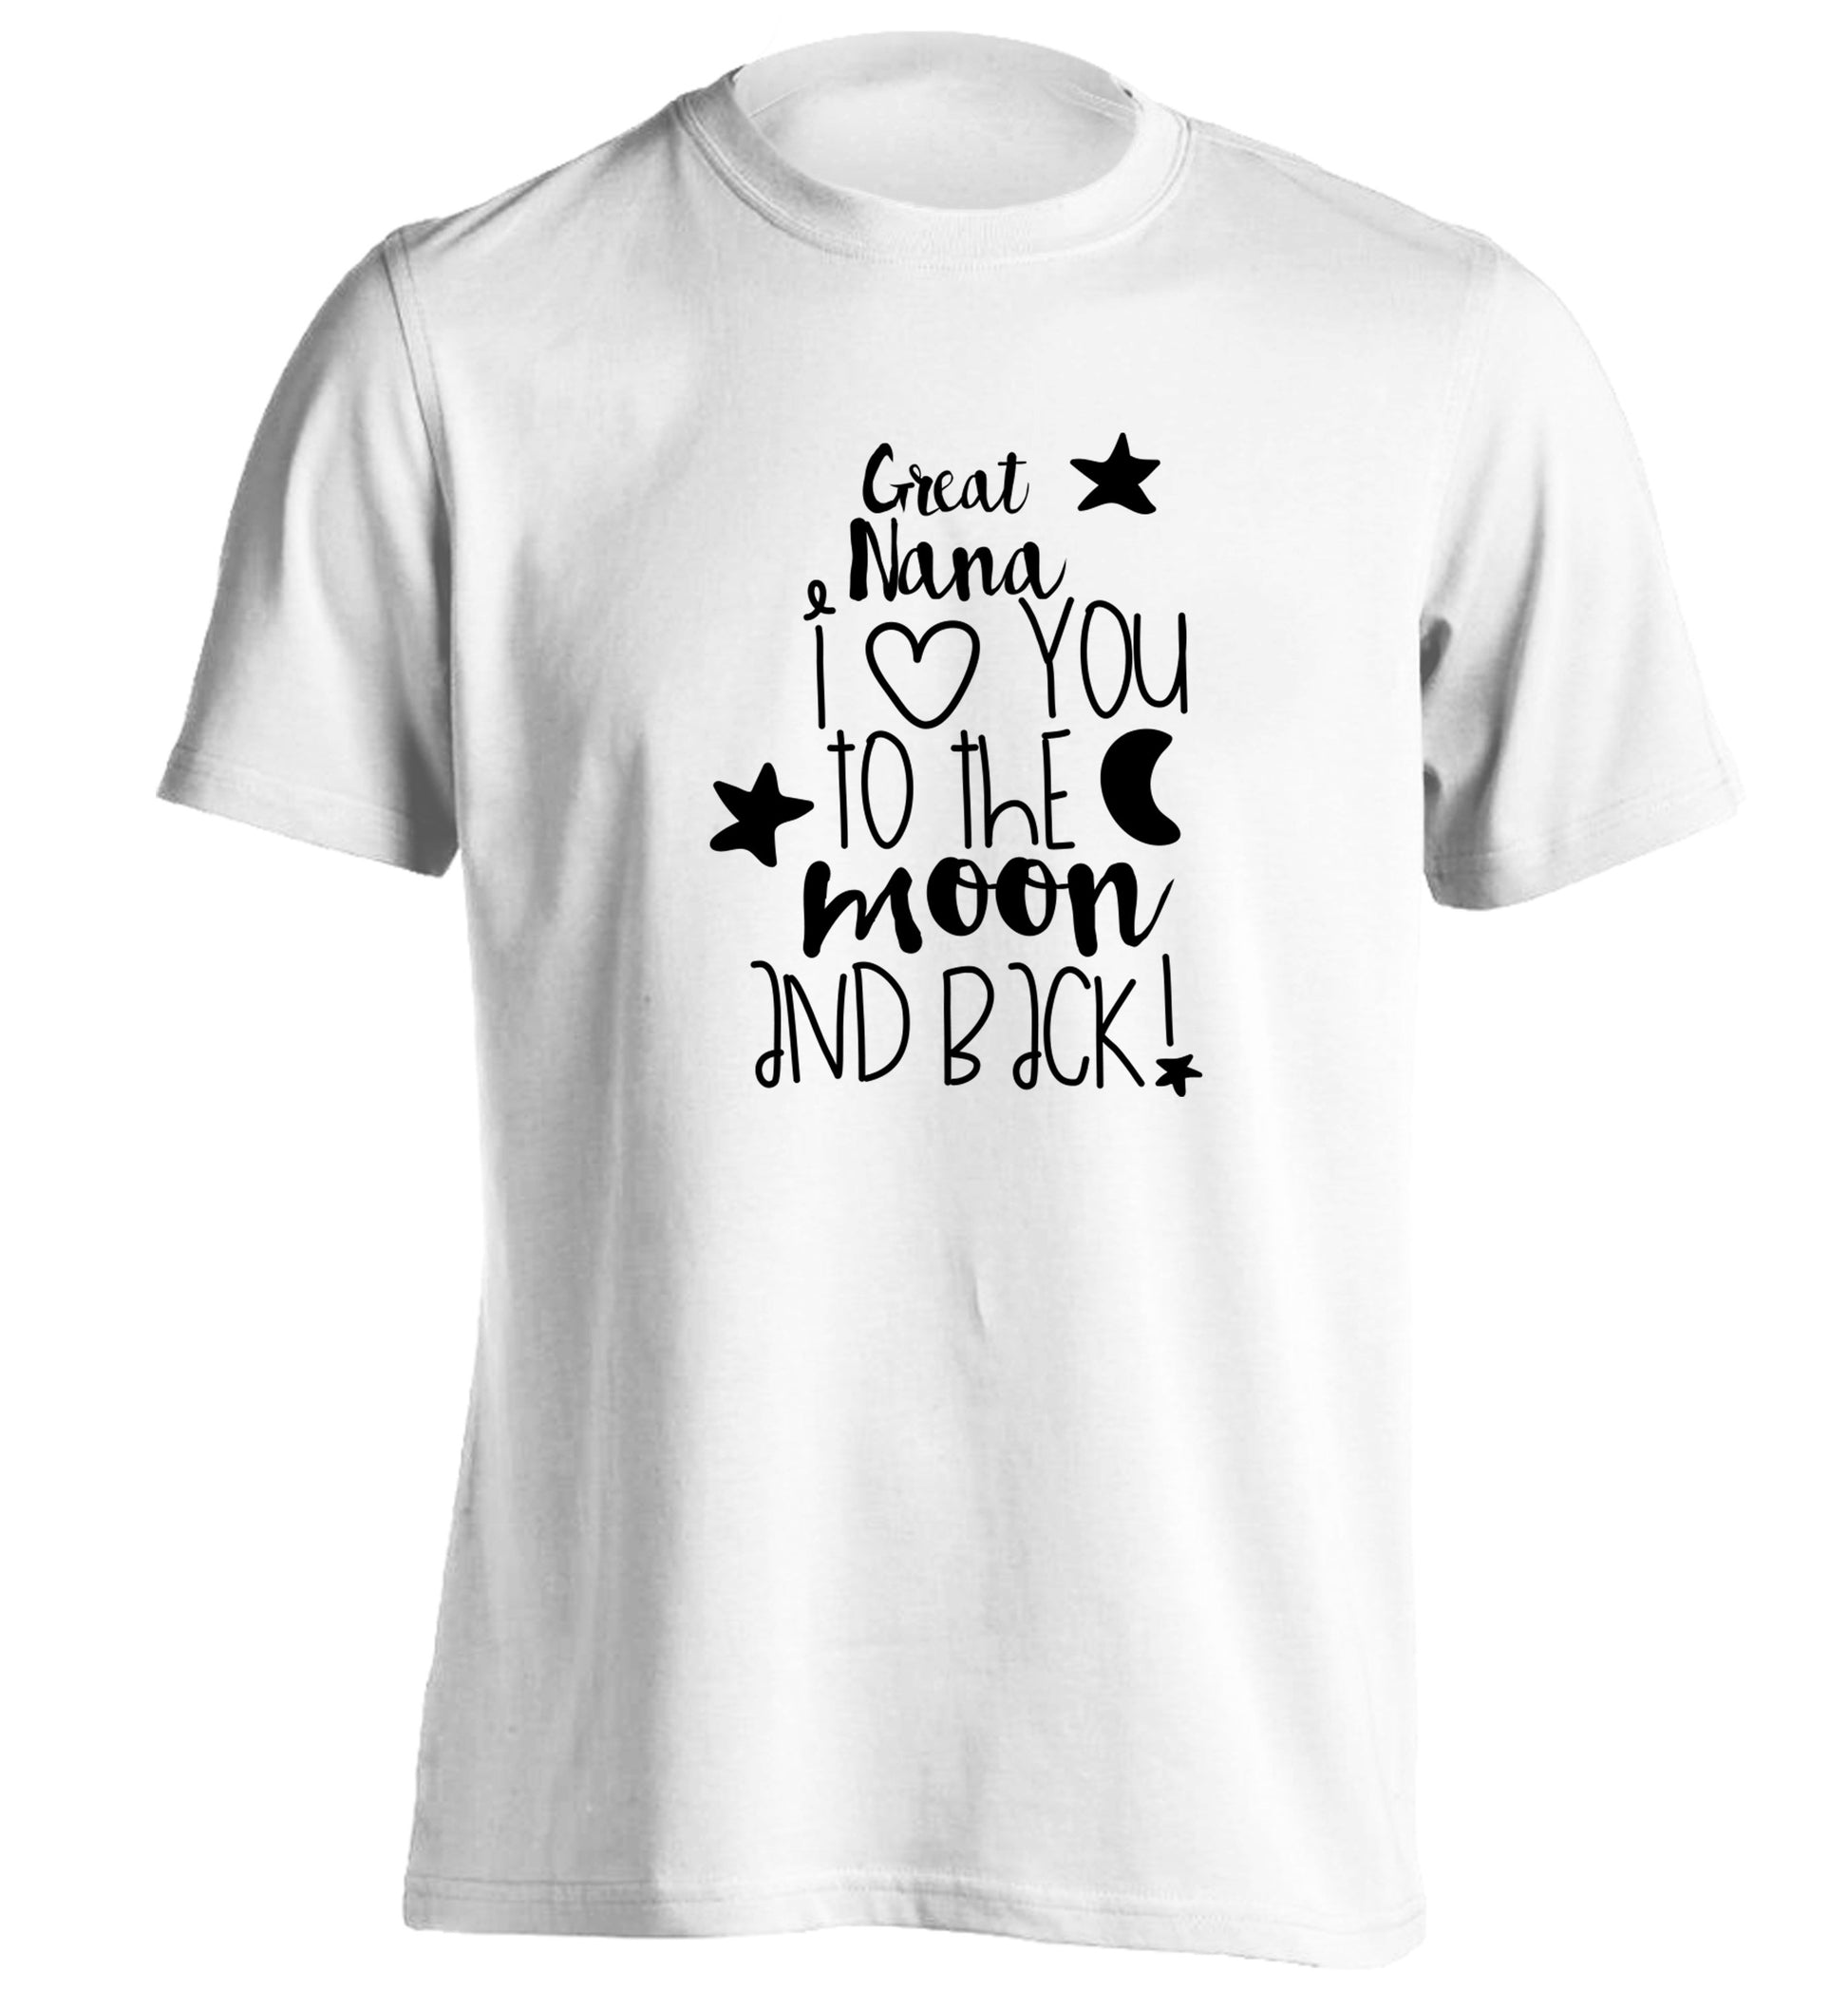 Great Nana I love you to the moon and back adults unisex white Tshirt 2XL